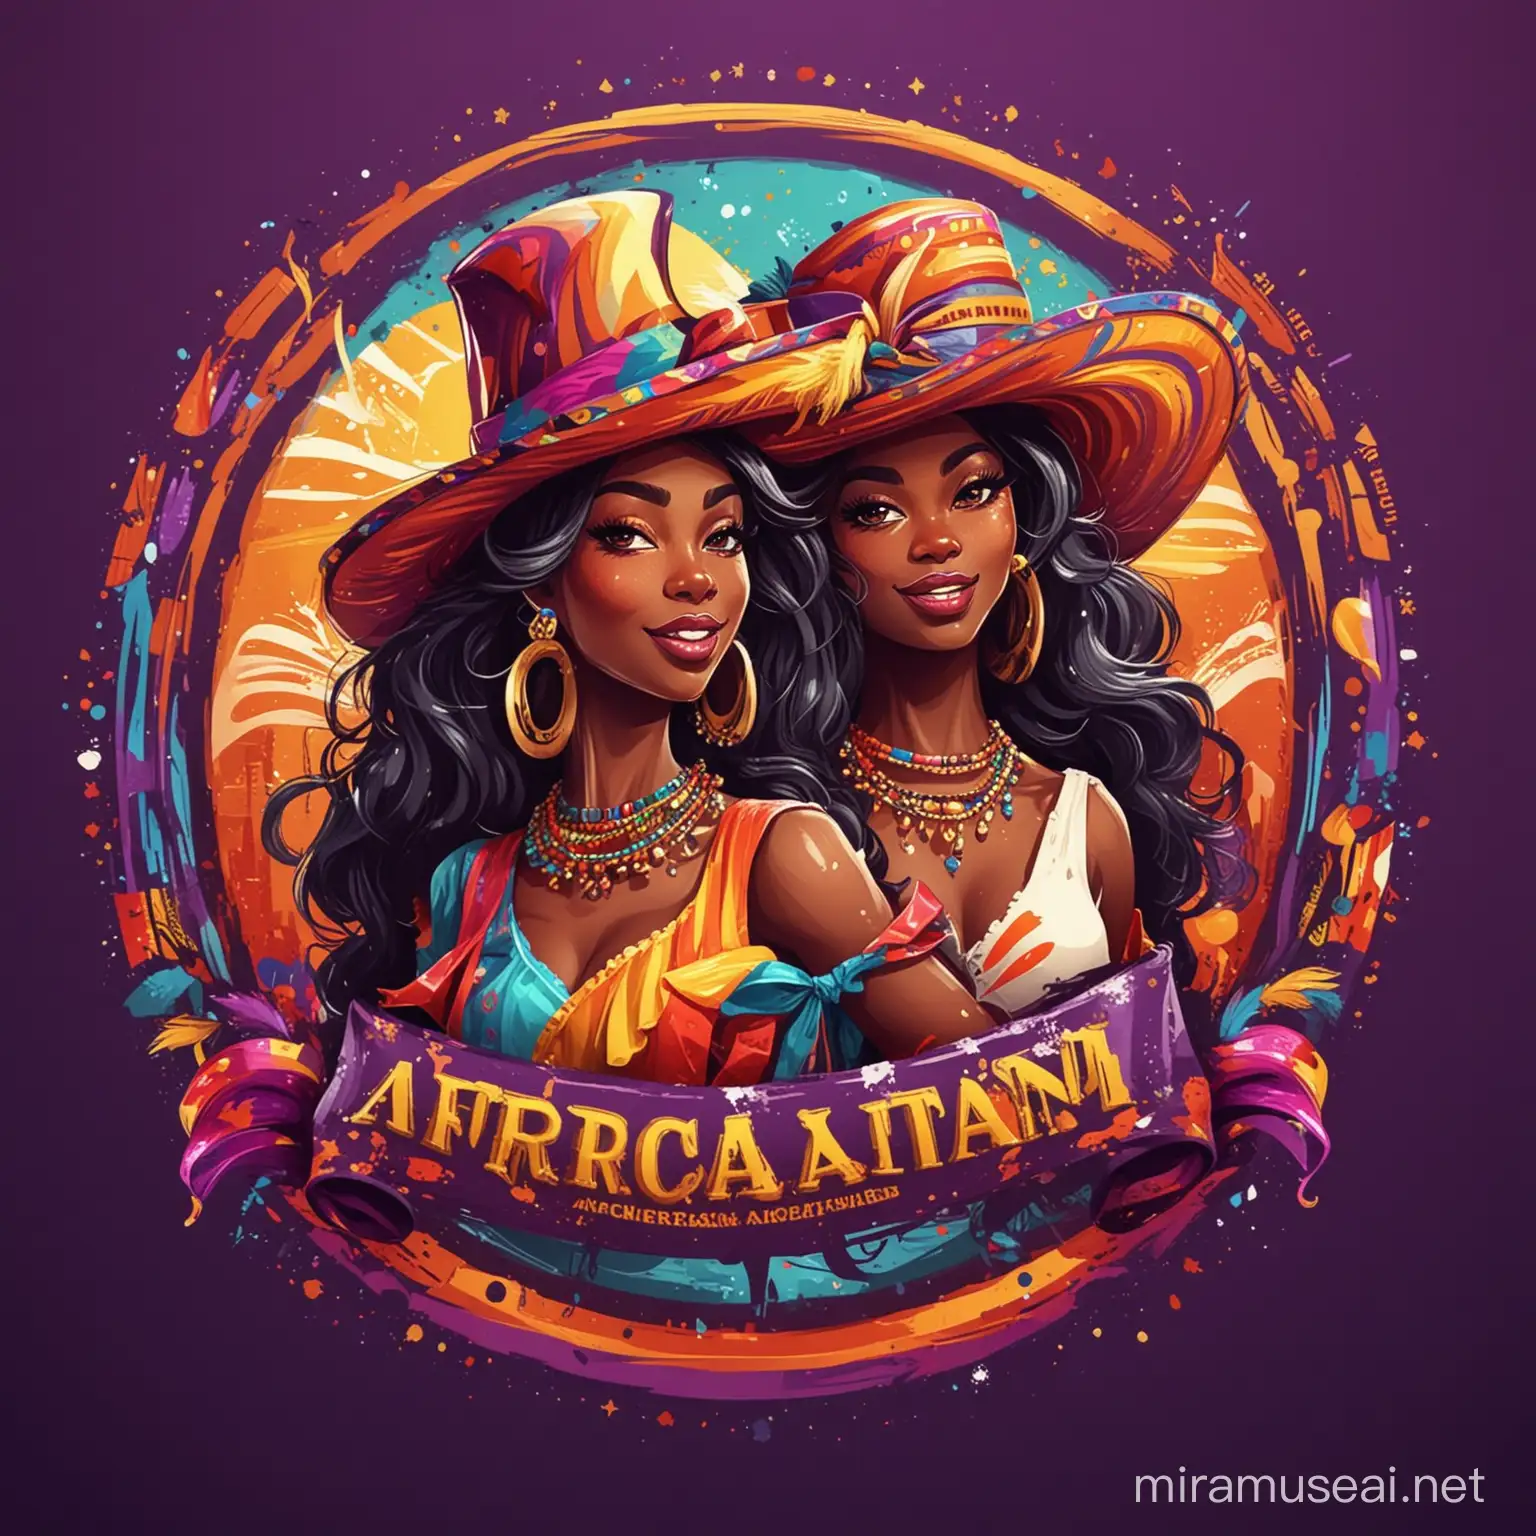 Create logo of african american fans partying, colorful fancy hats, fancy clothes, dancing to music, drinking alcohol, derby festival horse race setting